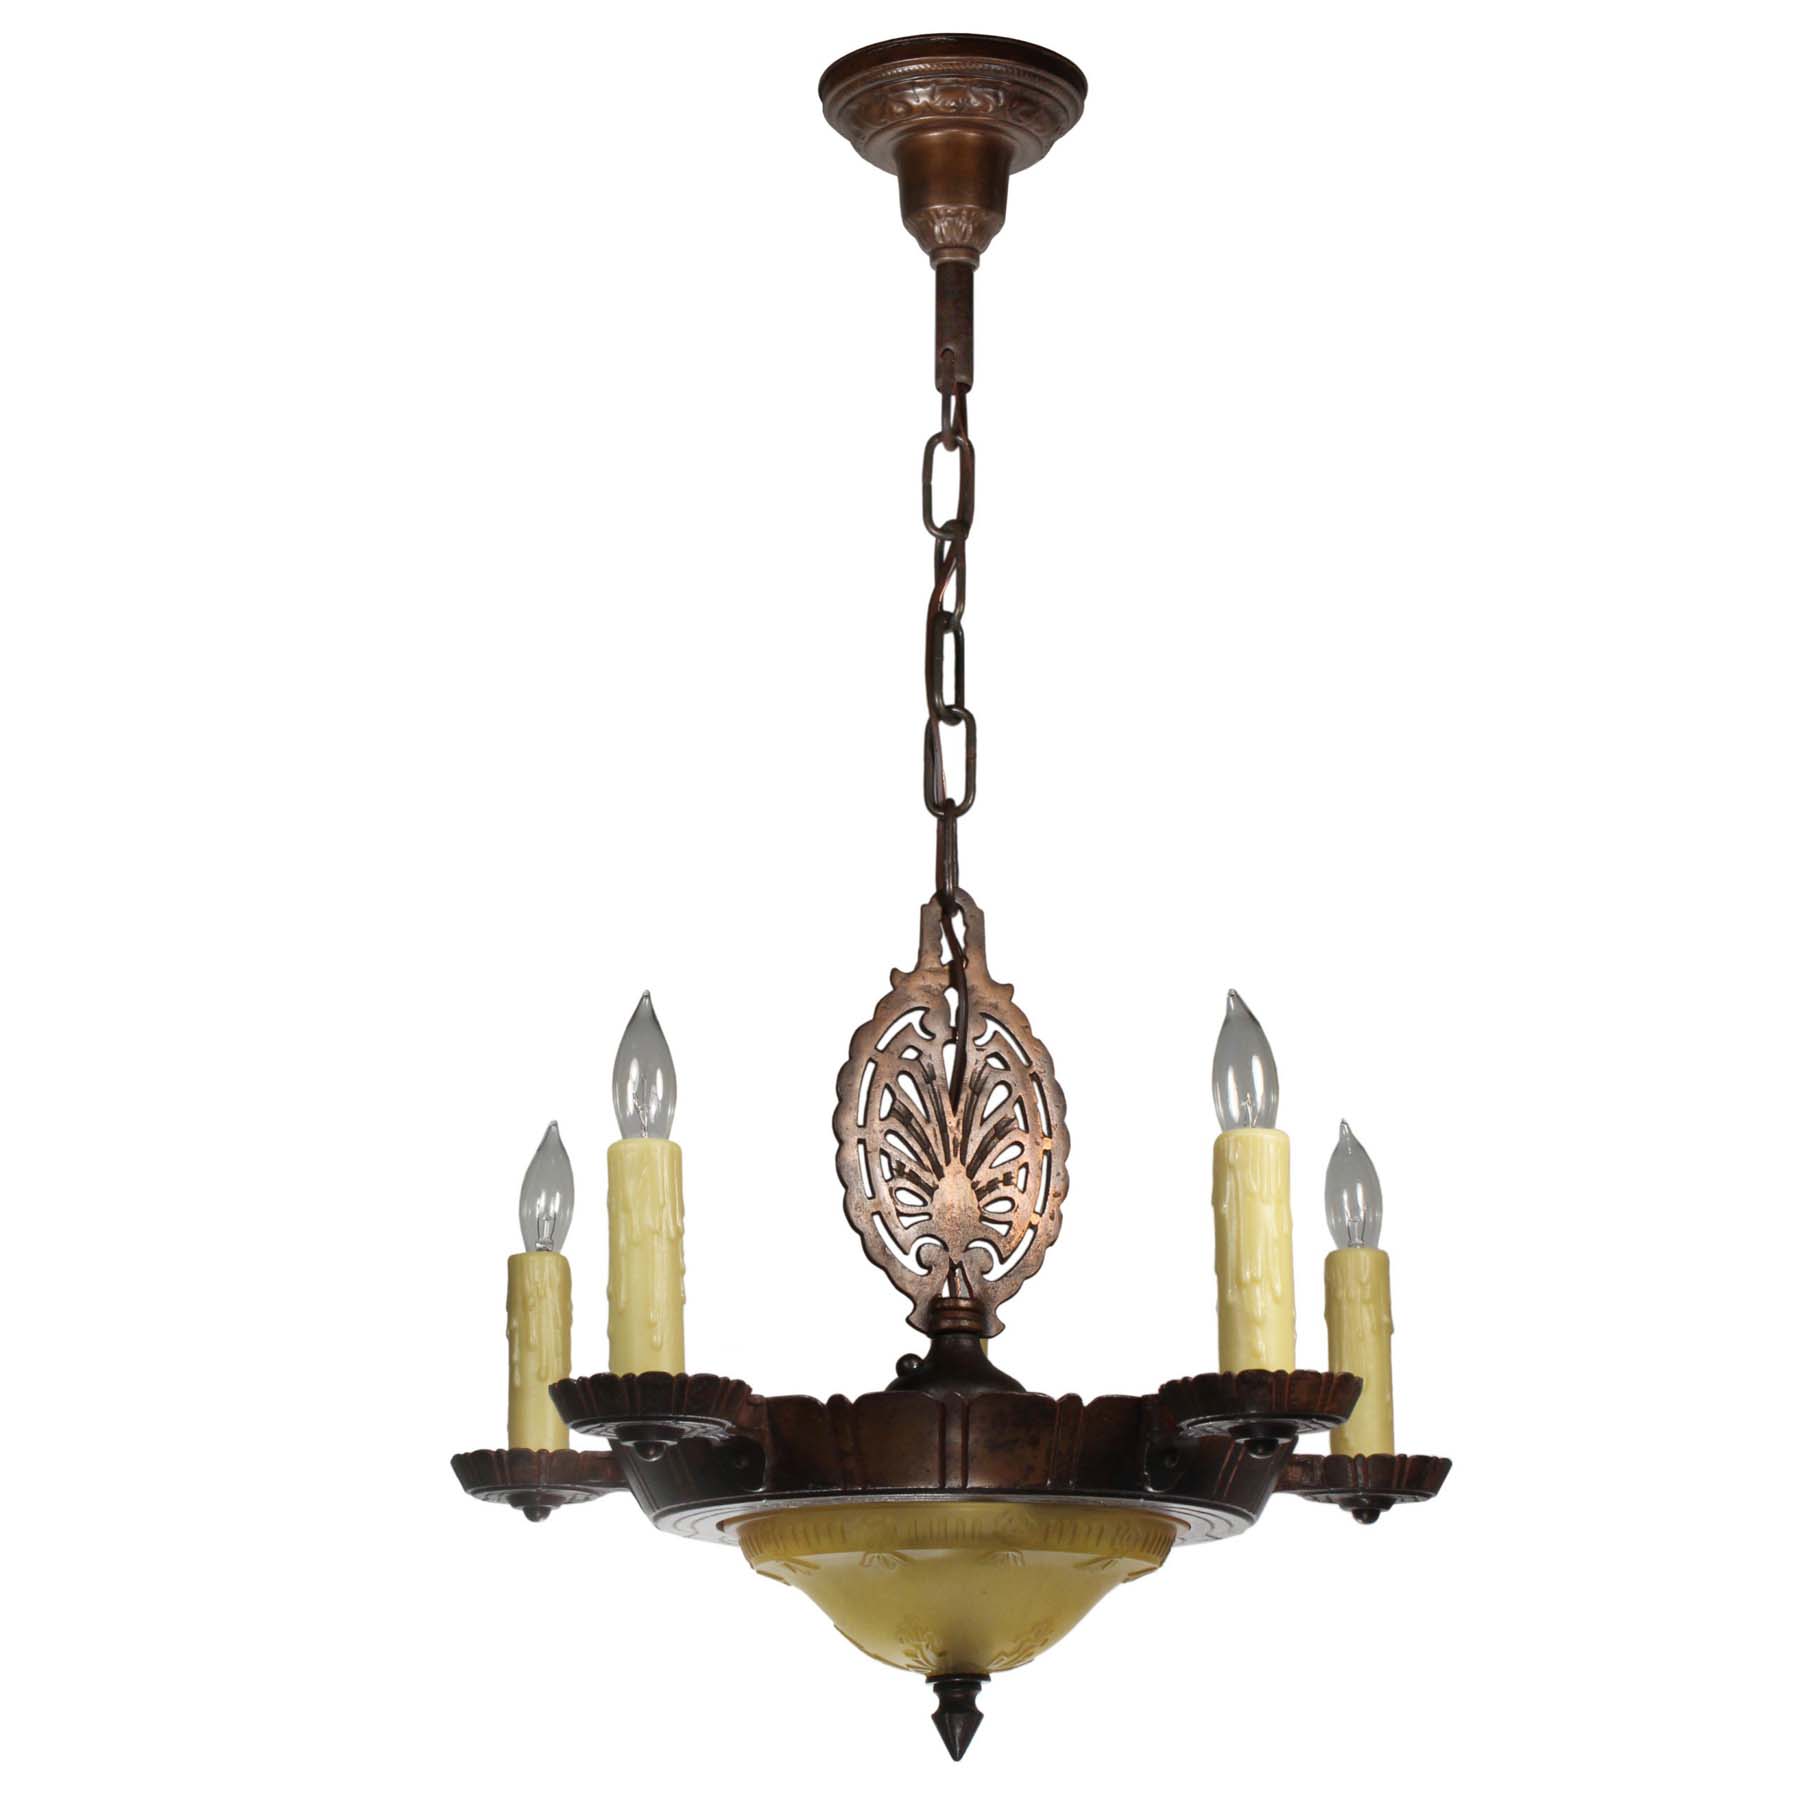 SOLD Antique Cast Iron Chandelier with Glass Shade-69935